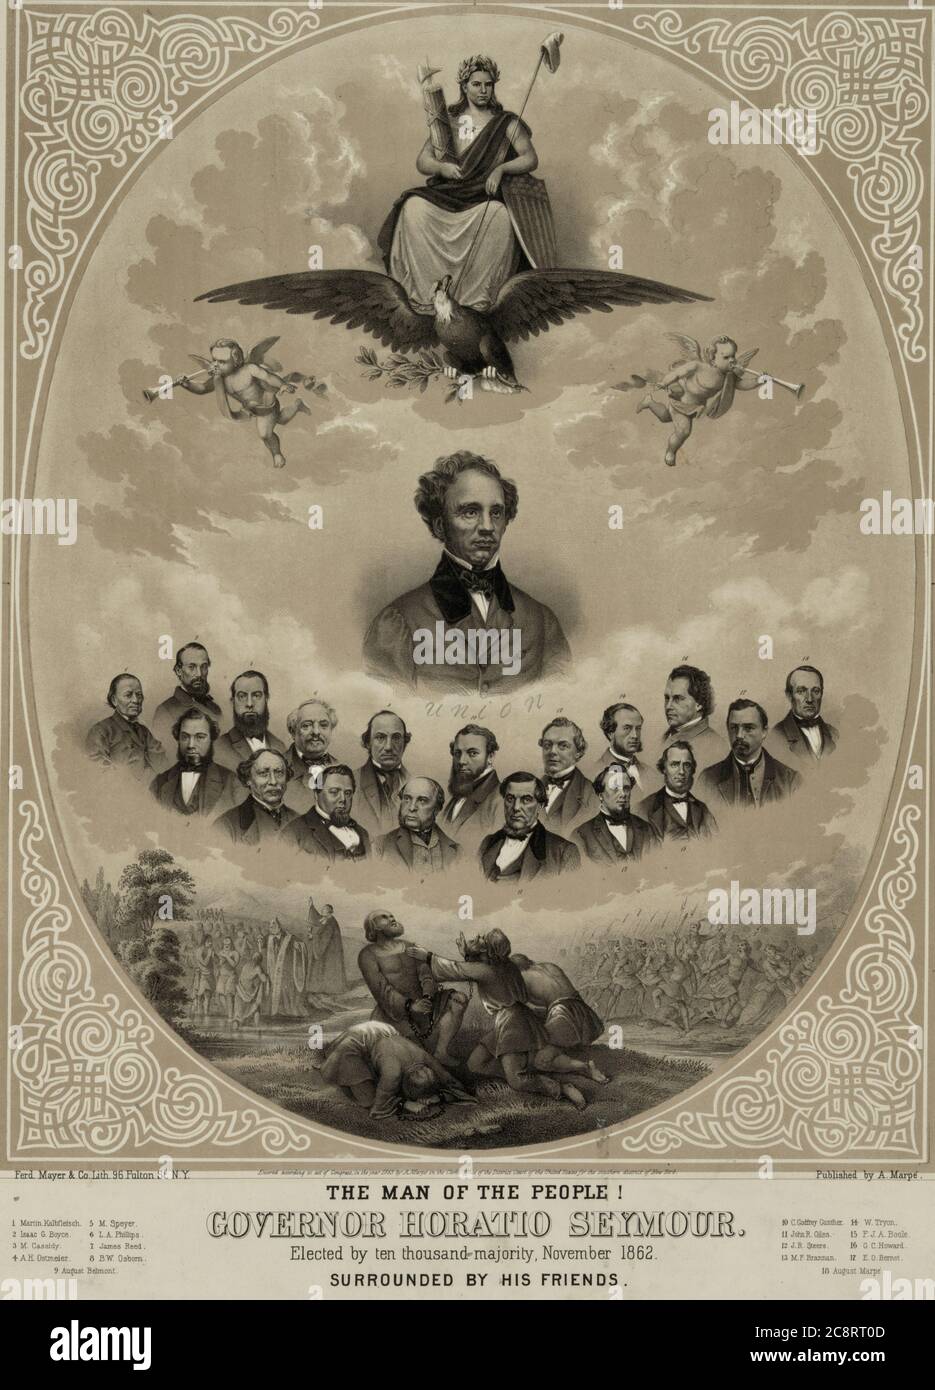 The man of the people! Governor Horatio Seymour. Elected by ten thousand majority, November 1862. : A dramatic apotheosis, commemorating Horatio Seymour's 1862 election as governor of New York. In the center is a bust portrait of Seymour with the word 'Union' below. Above him in the sky is Liberty or Columbia, borne aloft by an American eagle clutching an olive branch in his talons. She holds a fasces and a staff with a liberty cap. The eagle is flanked by two putti trumpeting the news. Below Seymour are portraits of several New York notables, Martin Kalbfleisch (mayor of Brooklyn), banker and Stock Photo